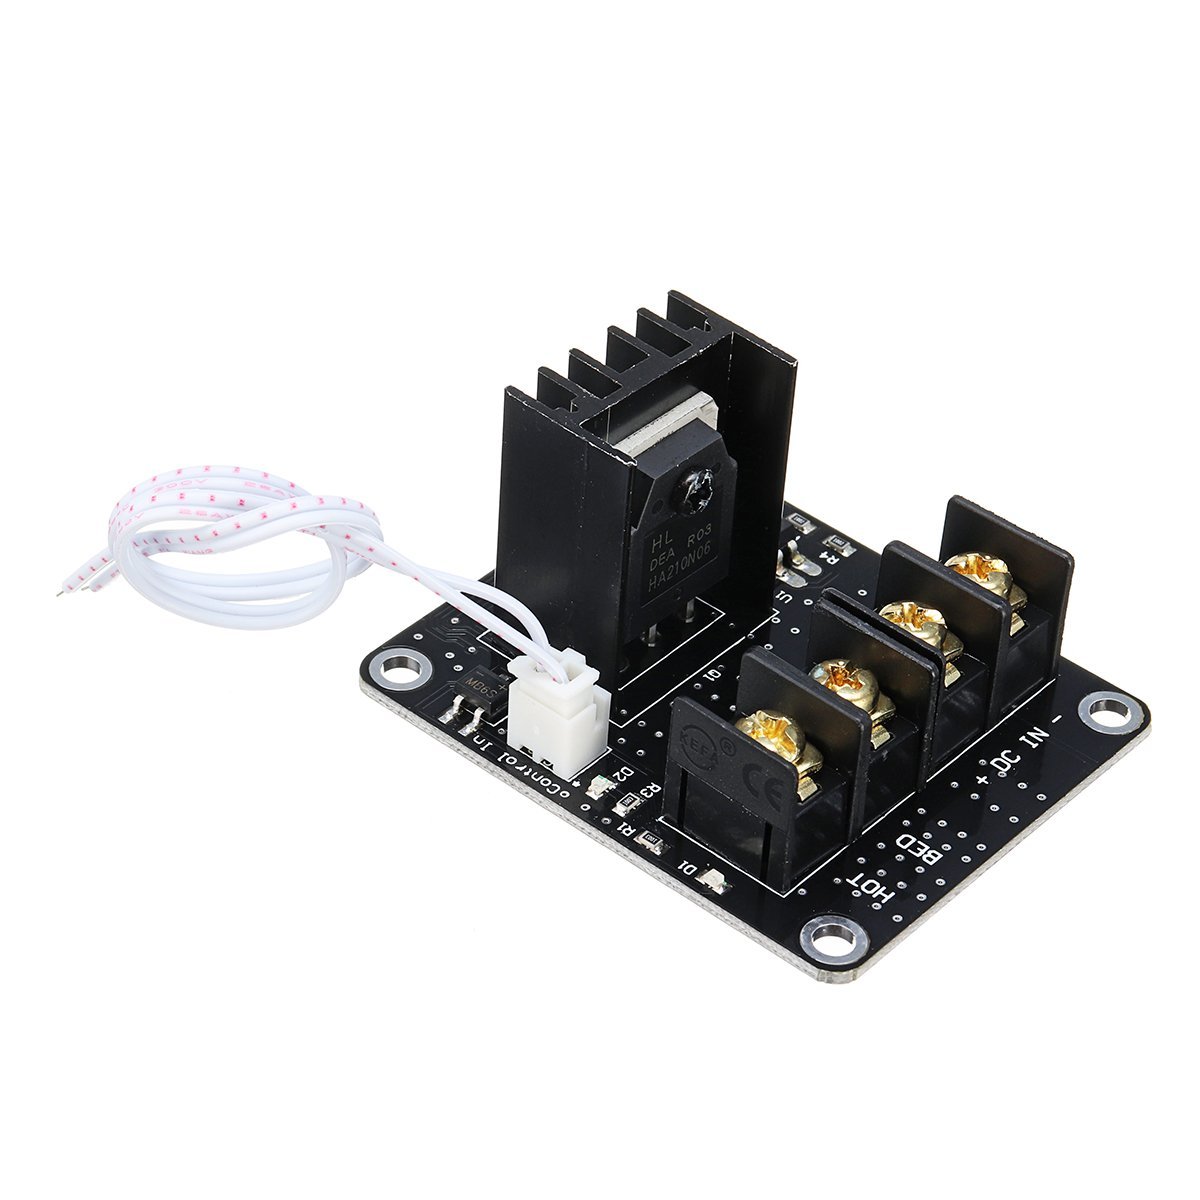 MOSFET High Power Heated Bed Expansion Power Module MOS Tube for Prusa i3 Anet A8/A6 3D Printer